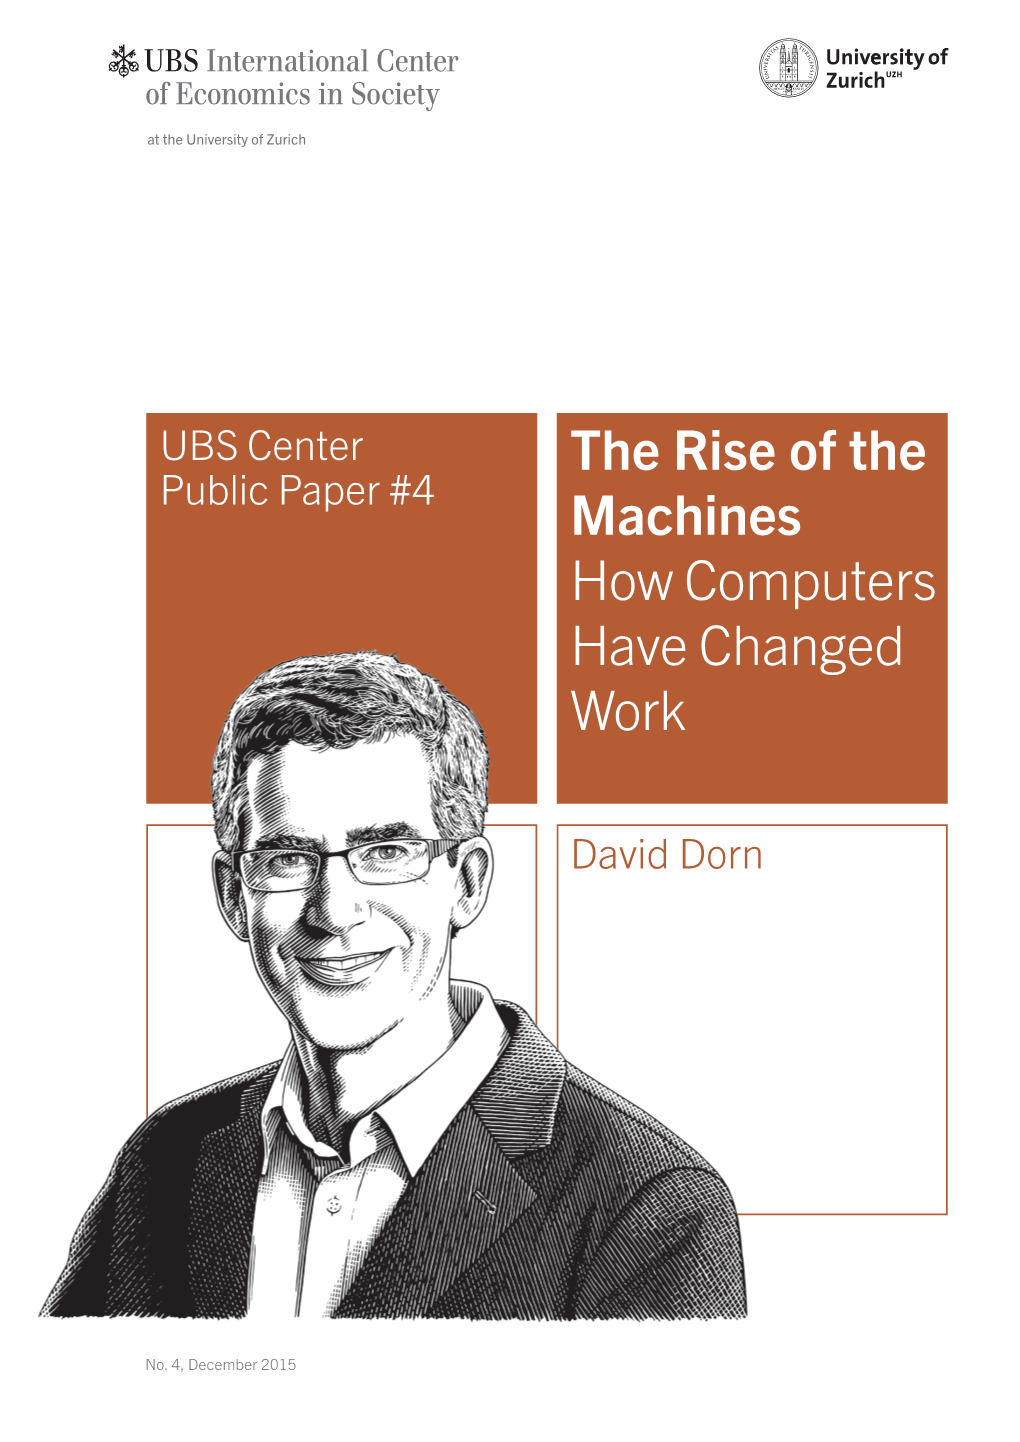 The Rise of the Machines How Computers Have Changed Work